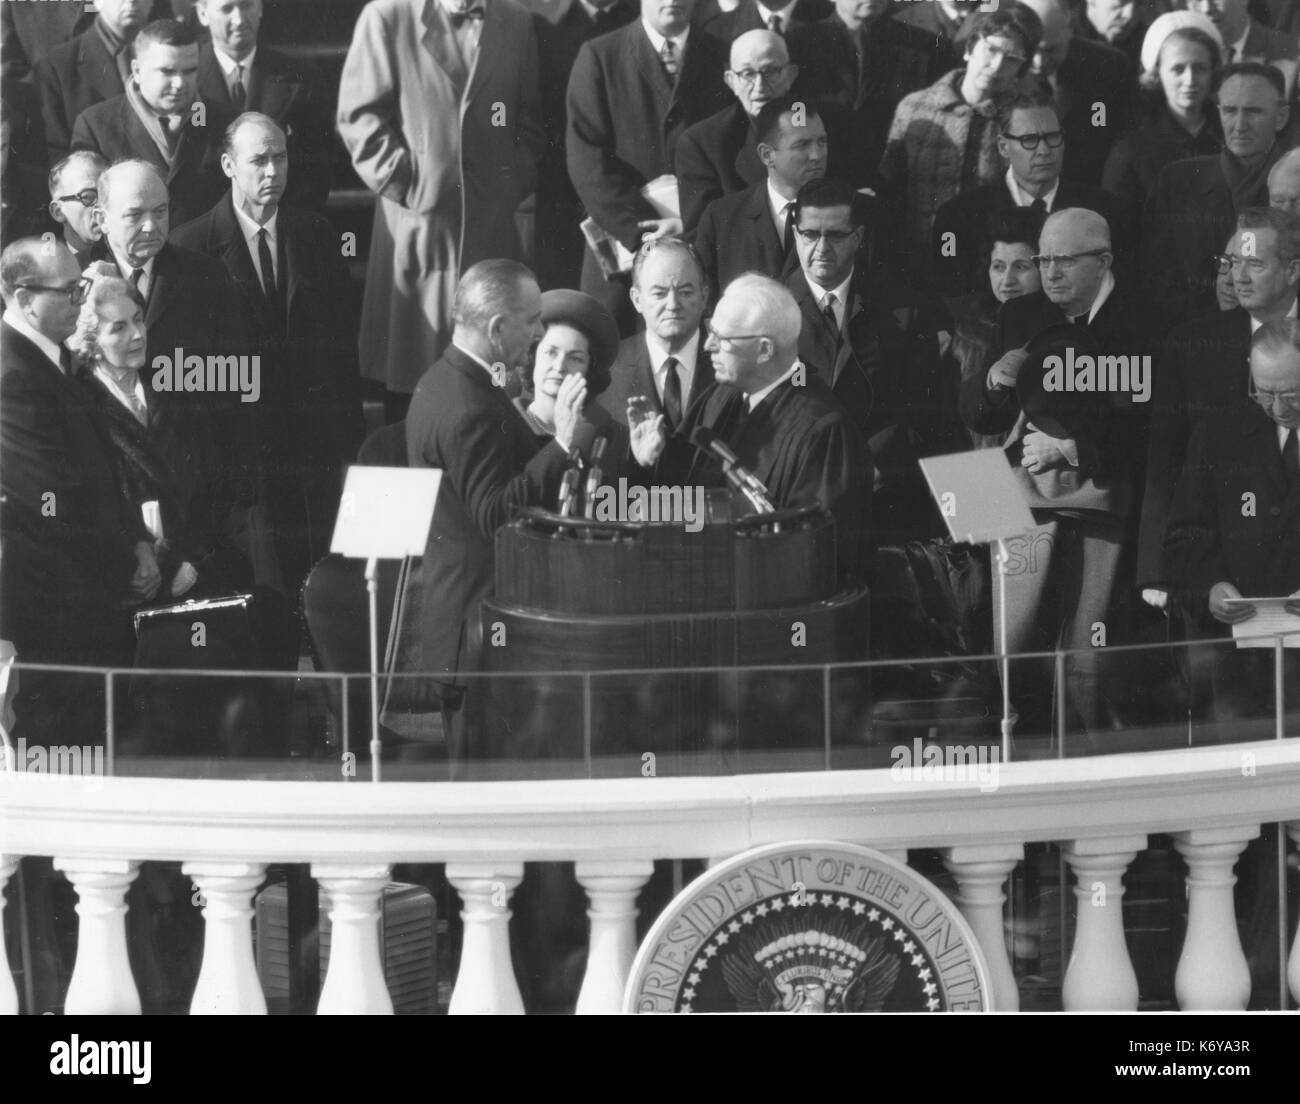 Lyndon Baines Johnson takes the oath of office as President of the United States from Chief Justice Earl Warren on January 20, 1965, at the Capitol. Standing just beyond themn are Mrs. Johnson and Vice President Hubert H. Humphrey. Washington, DC. 1965. Stock Photo